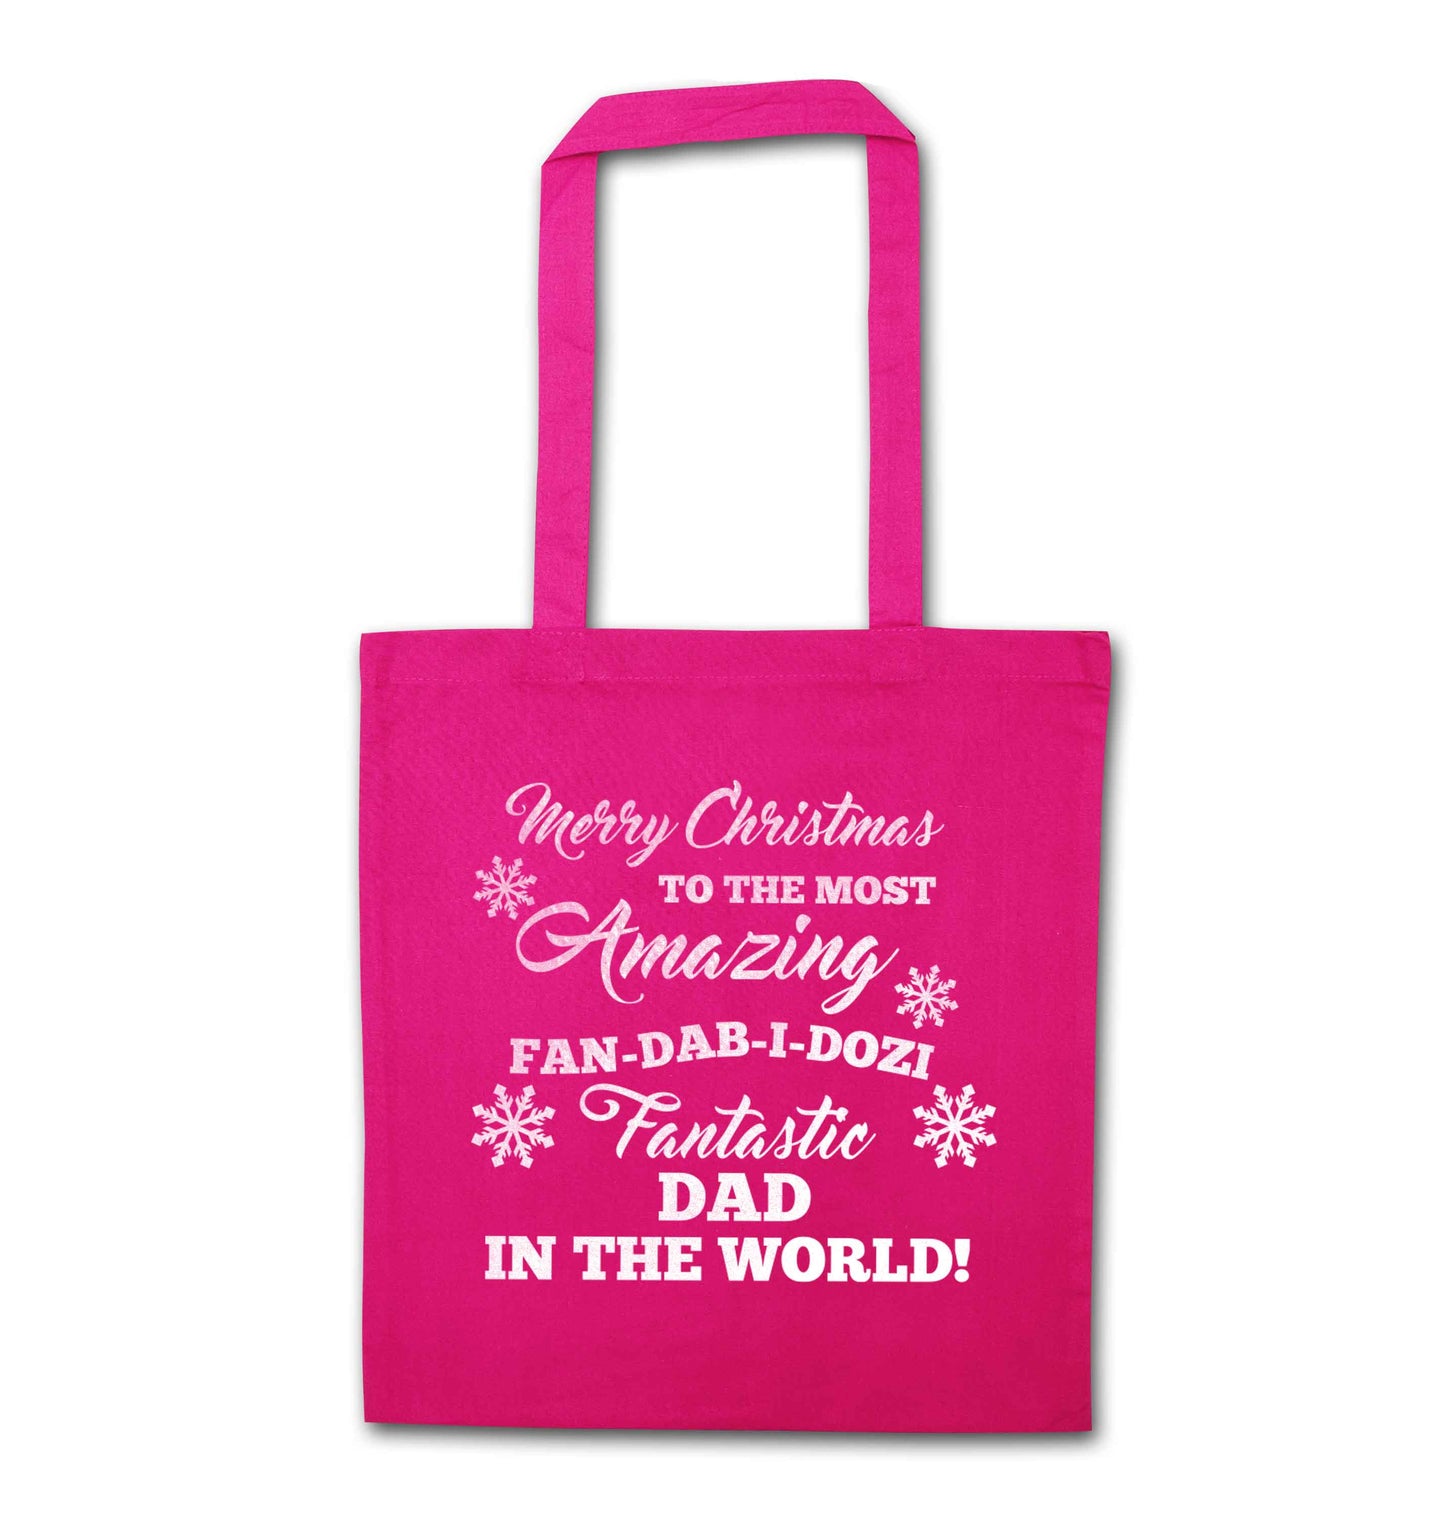 Merry Christmas to the most amazing fan-dab-i-dozi fantasic Dad in the world pink tote bag